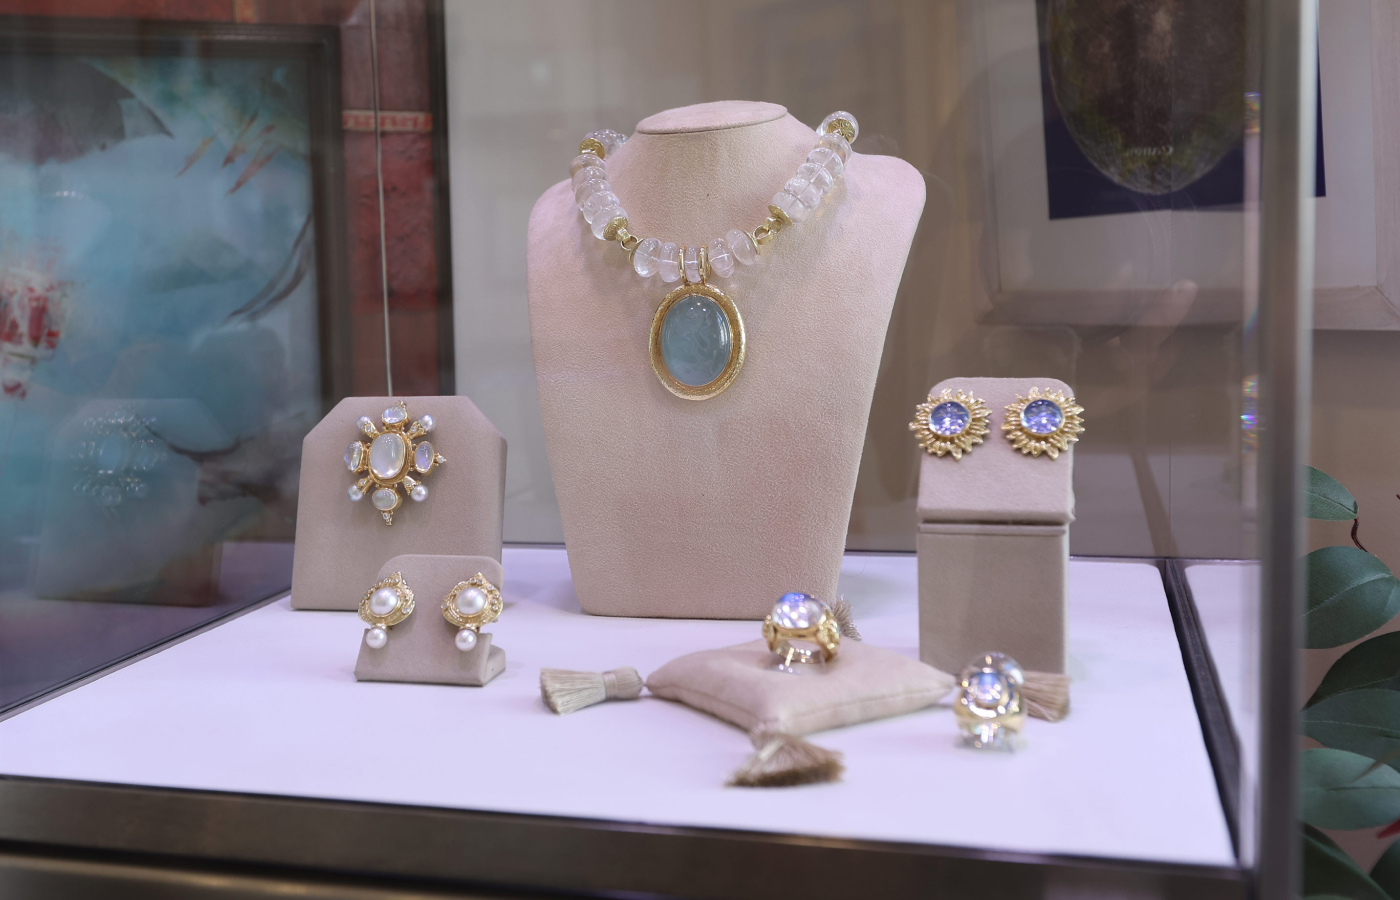 A selection of statement fine jewellery designs by Elizabeth Gage, who is celebrating the 60th anniversary of her brand in 2023